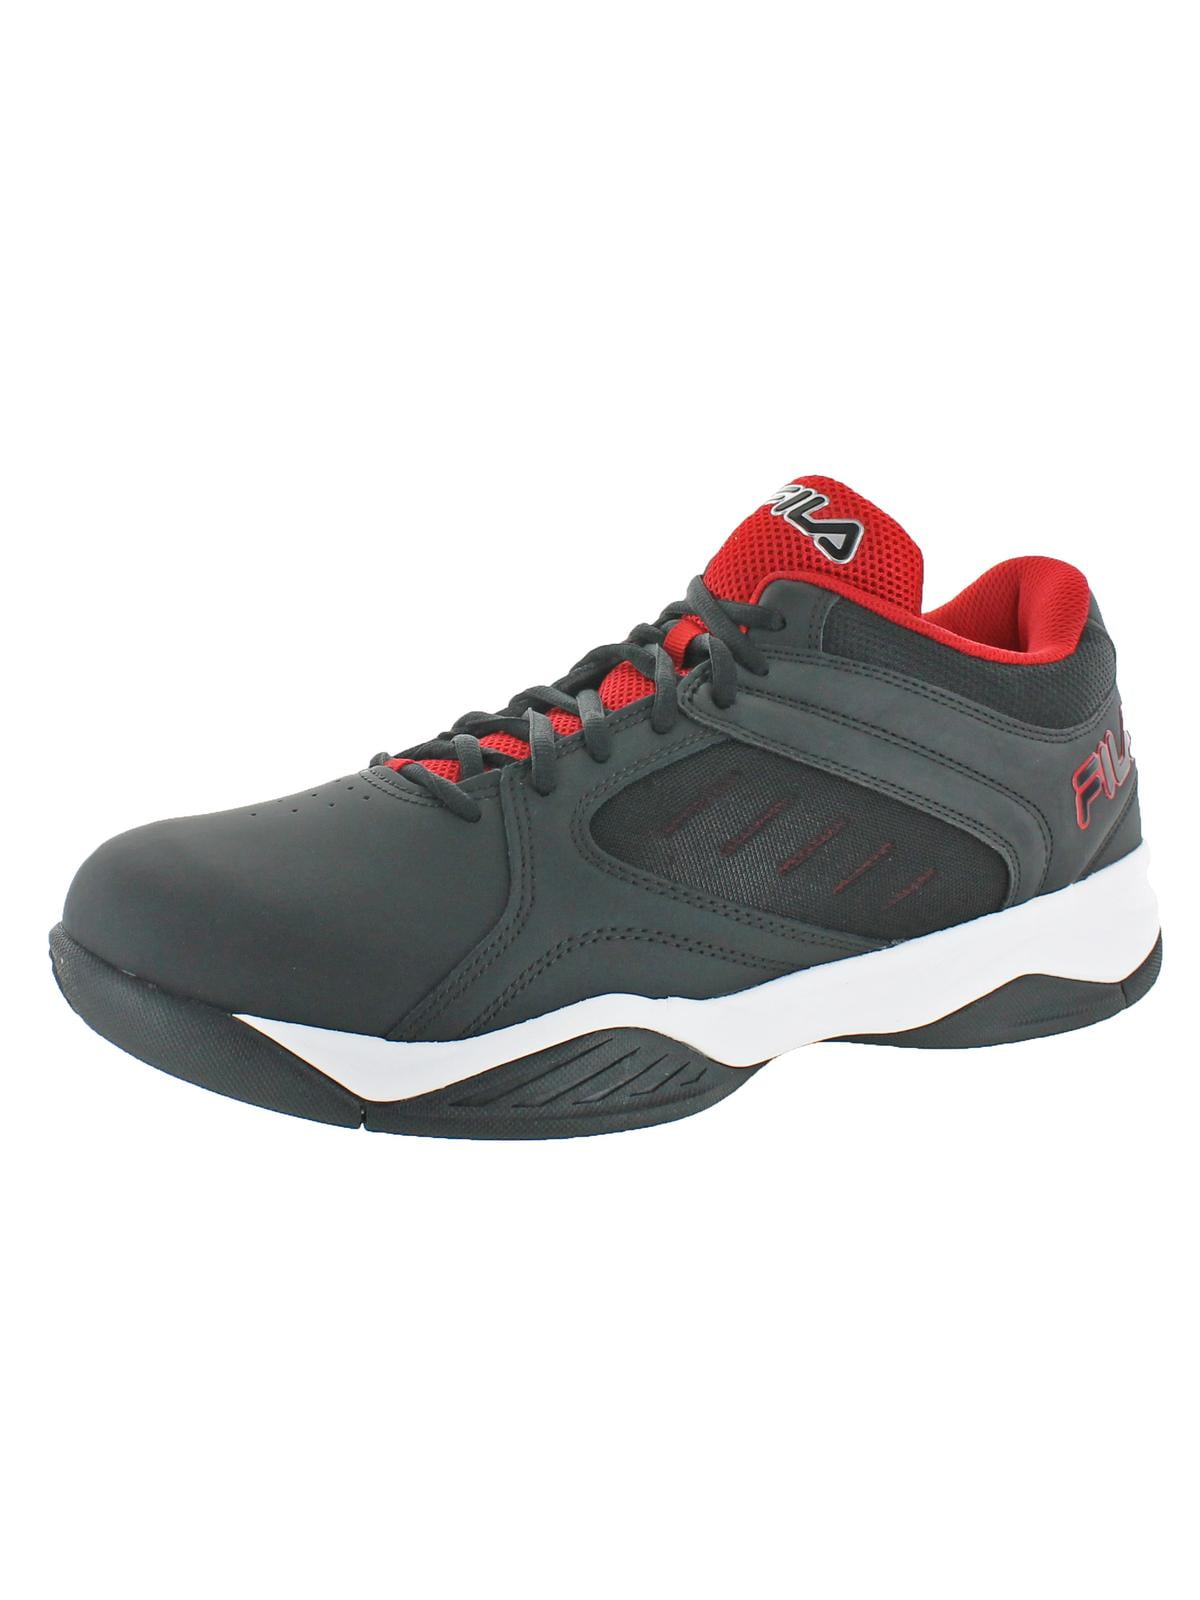 mens leather basketball shoes